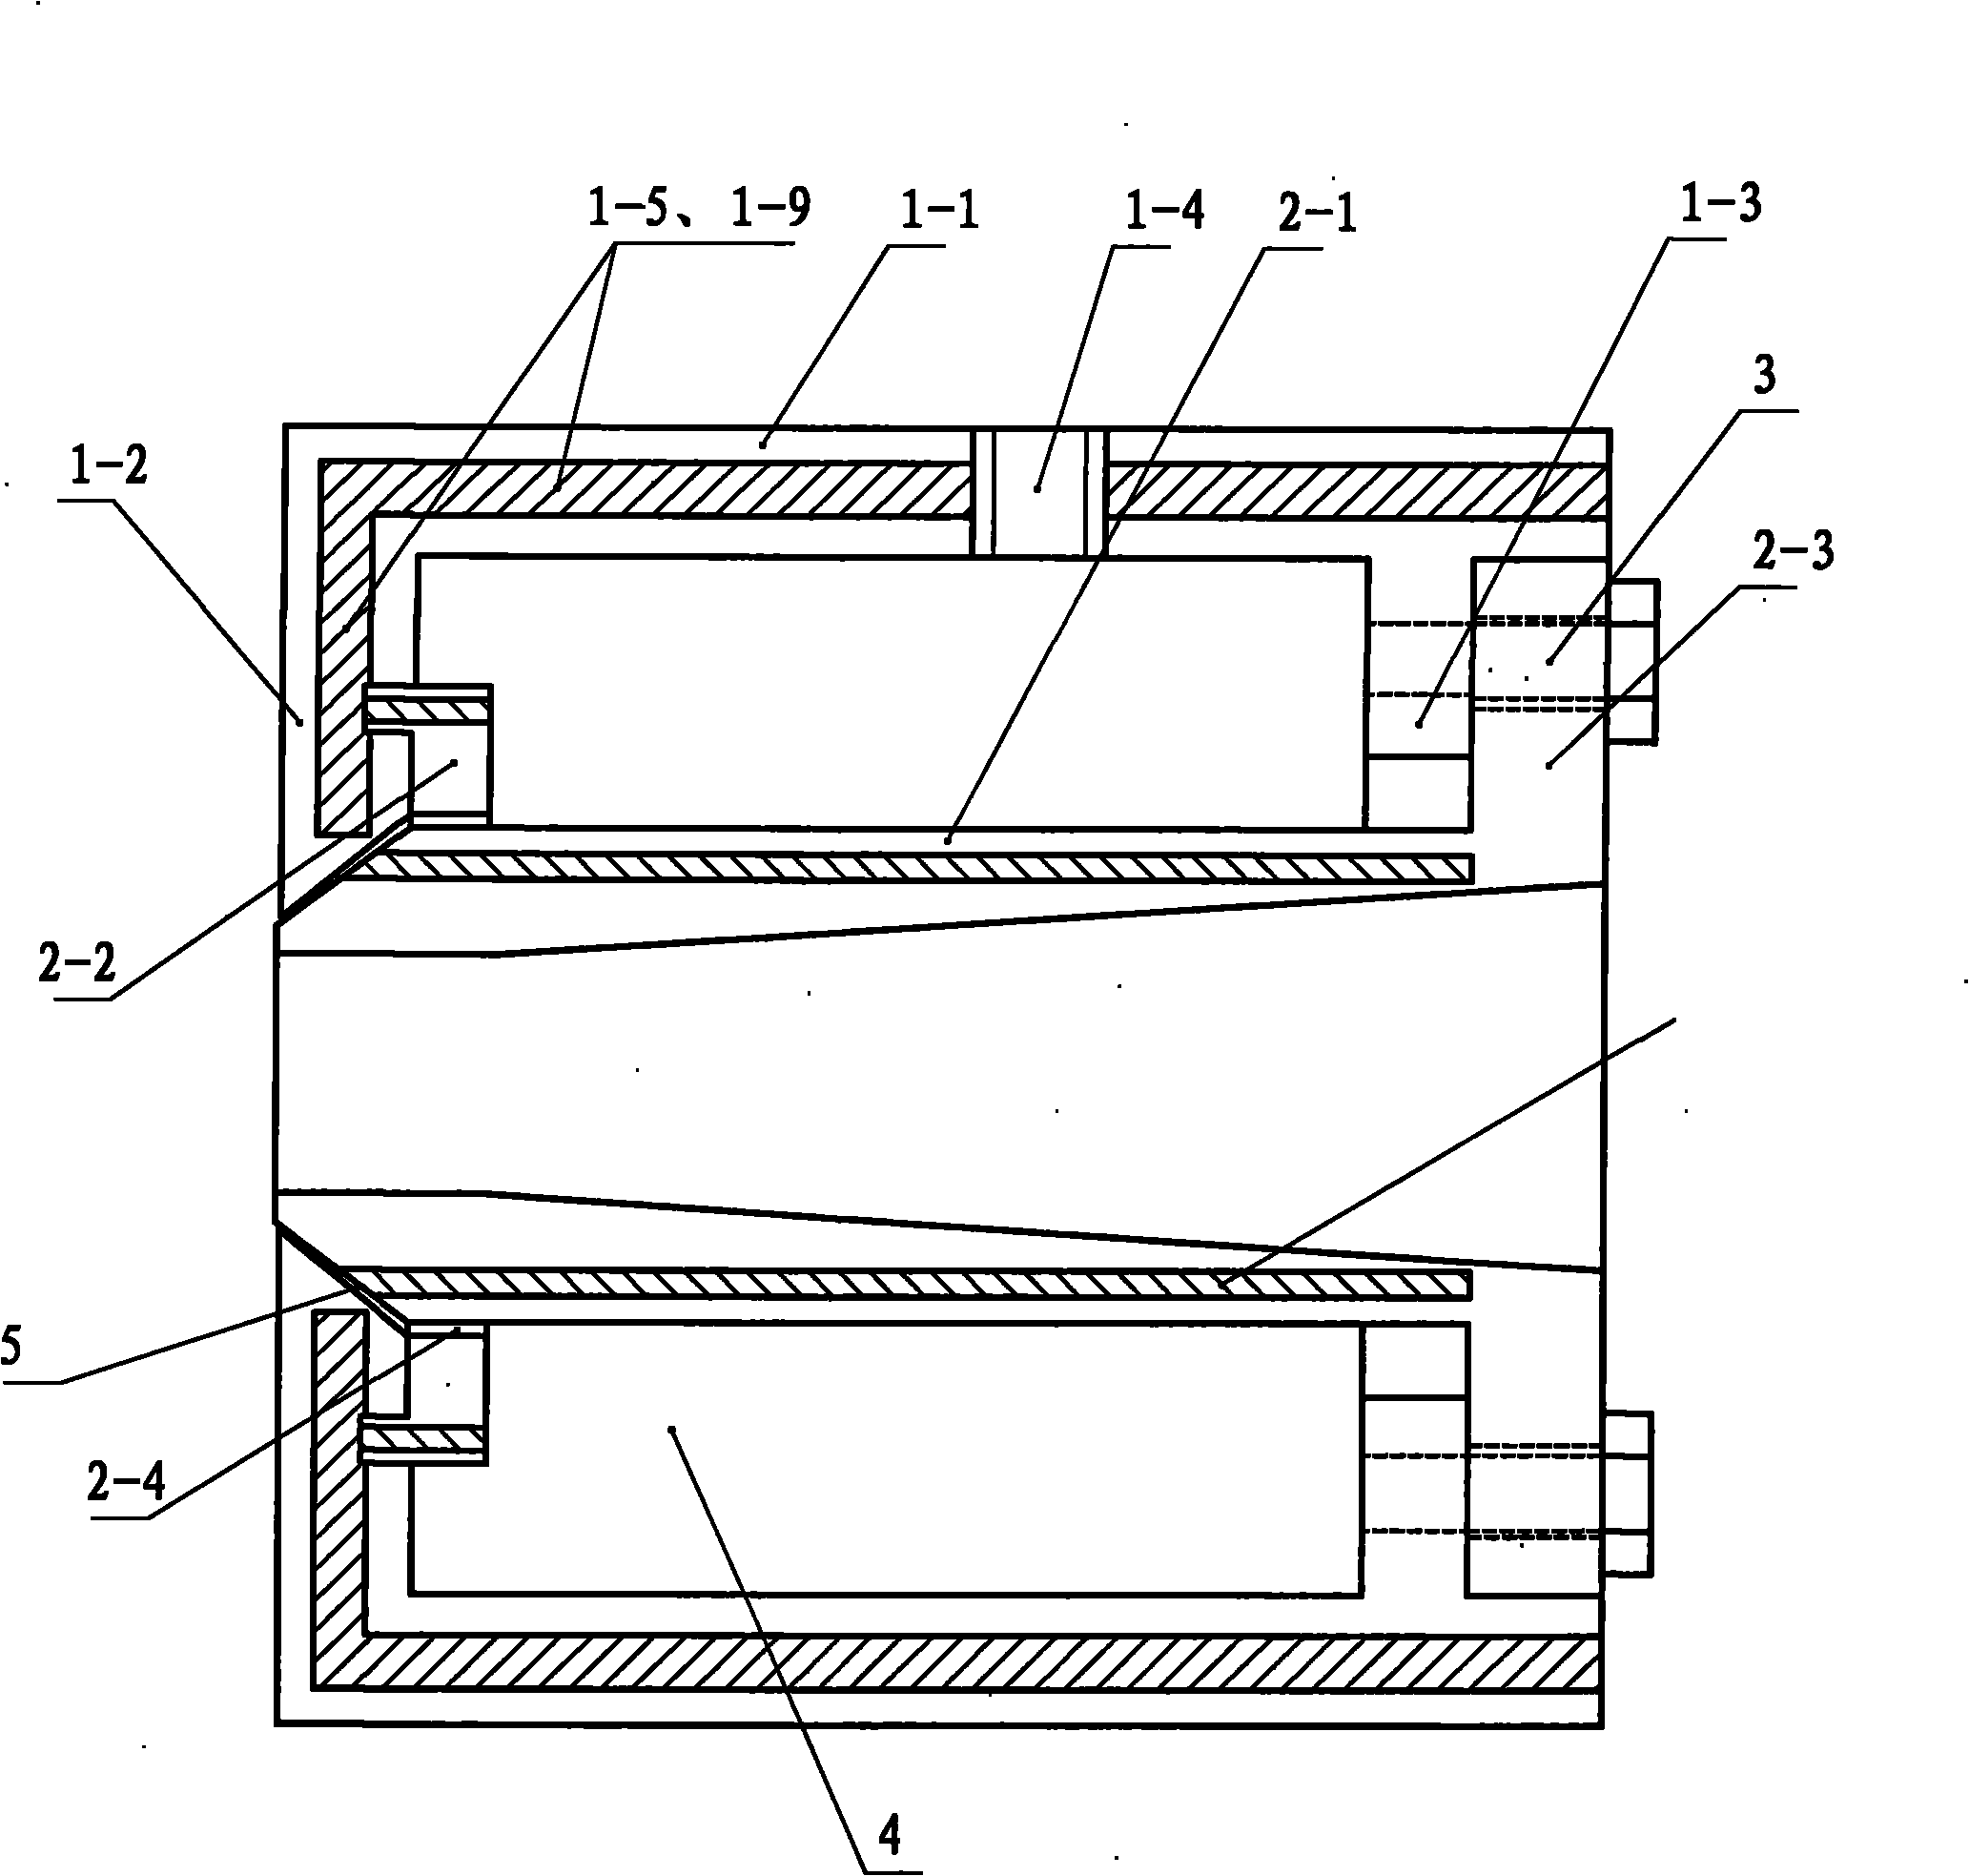 Annular water-blowing device